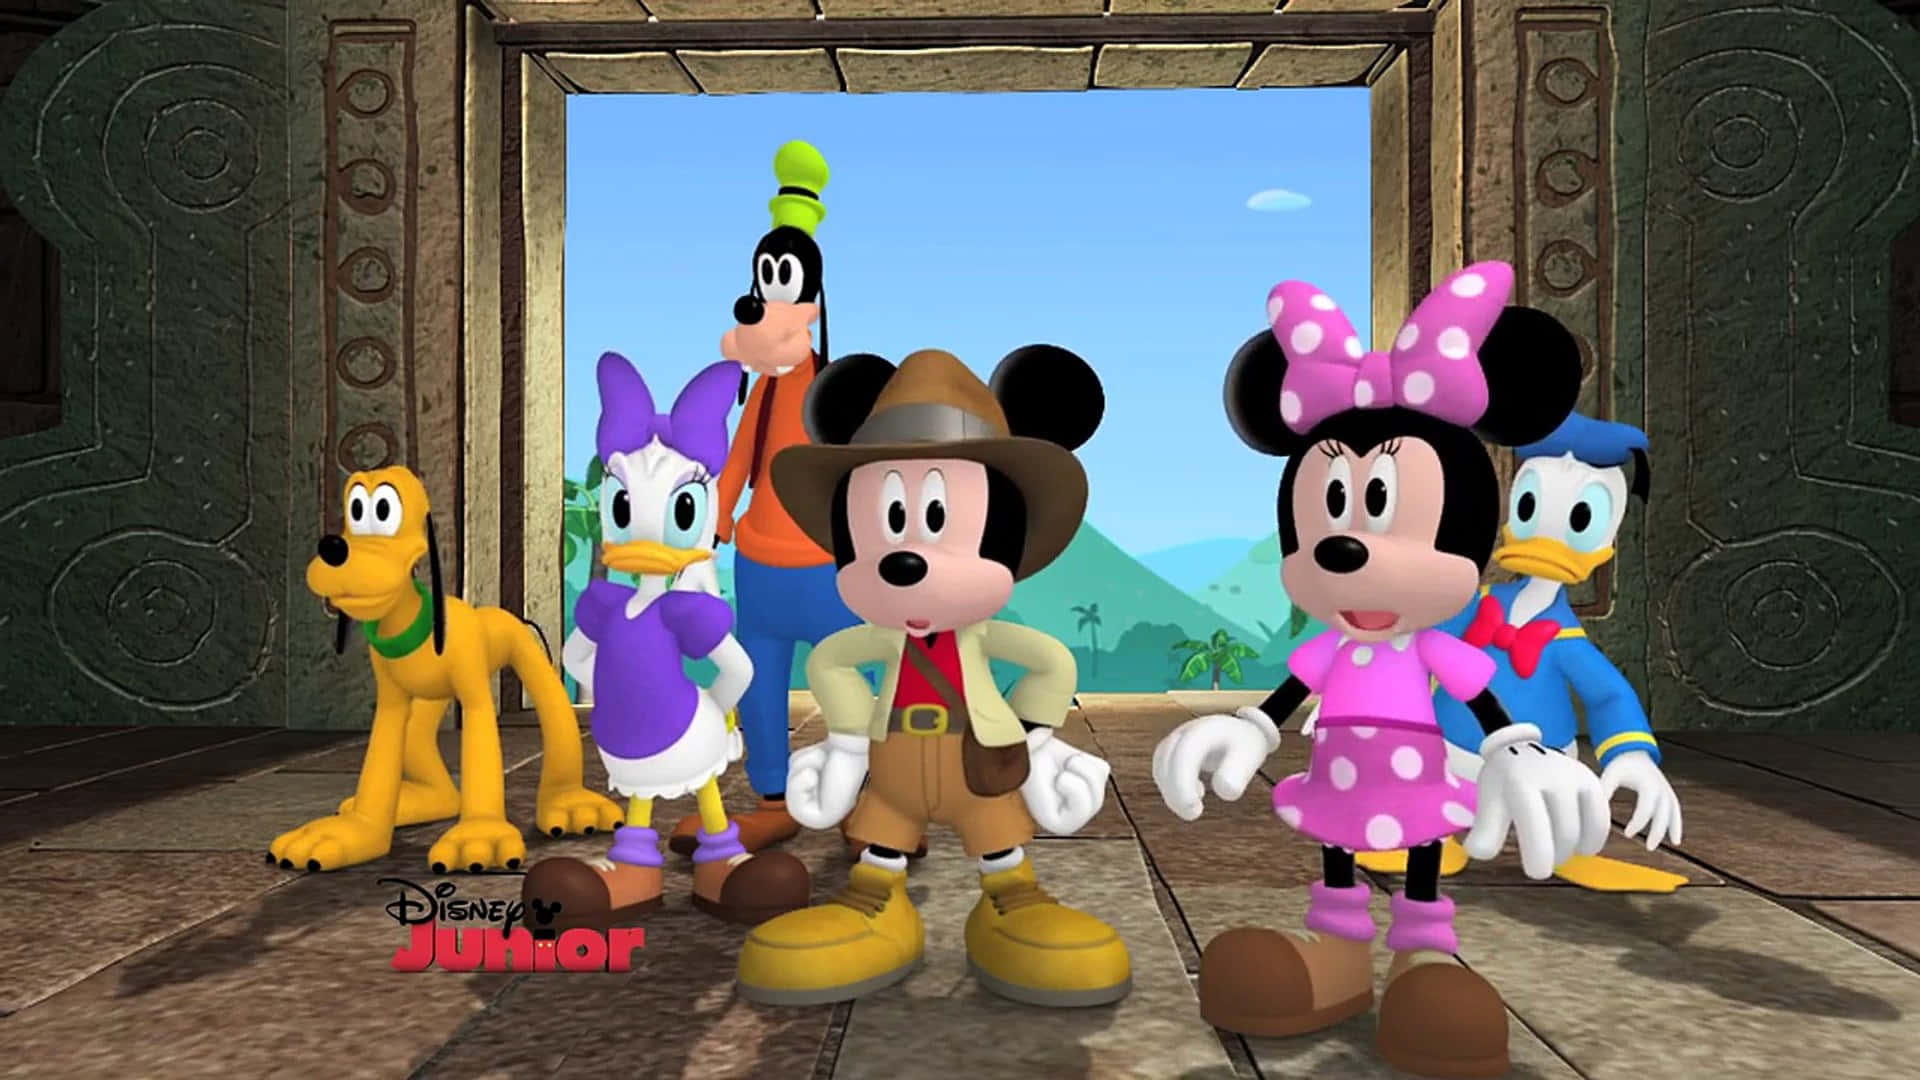 All Our Favorite Friends Gathered in the Mickey Mouse Clubhouse!